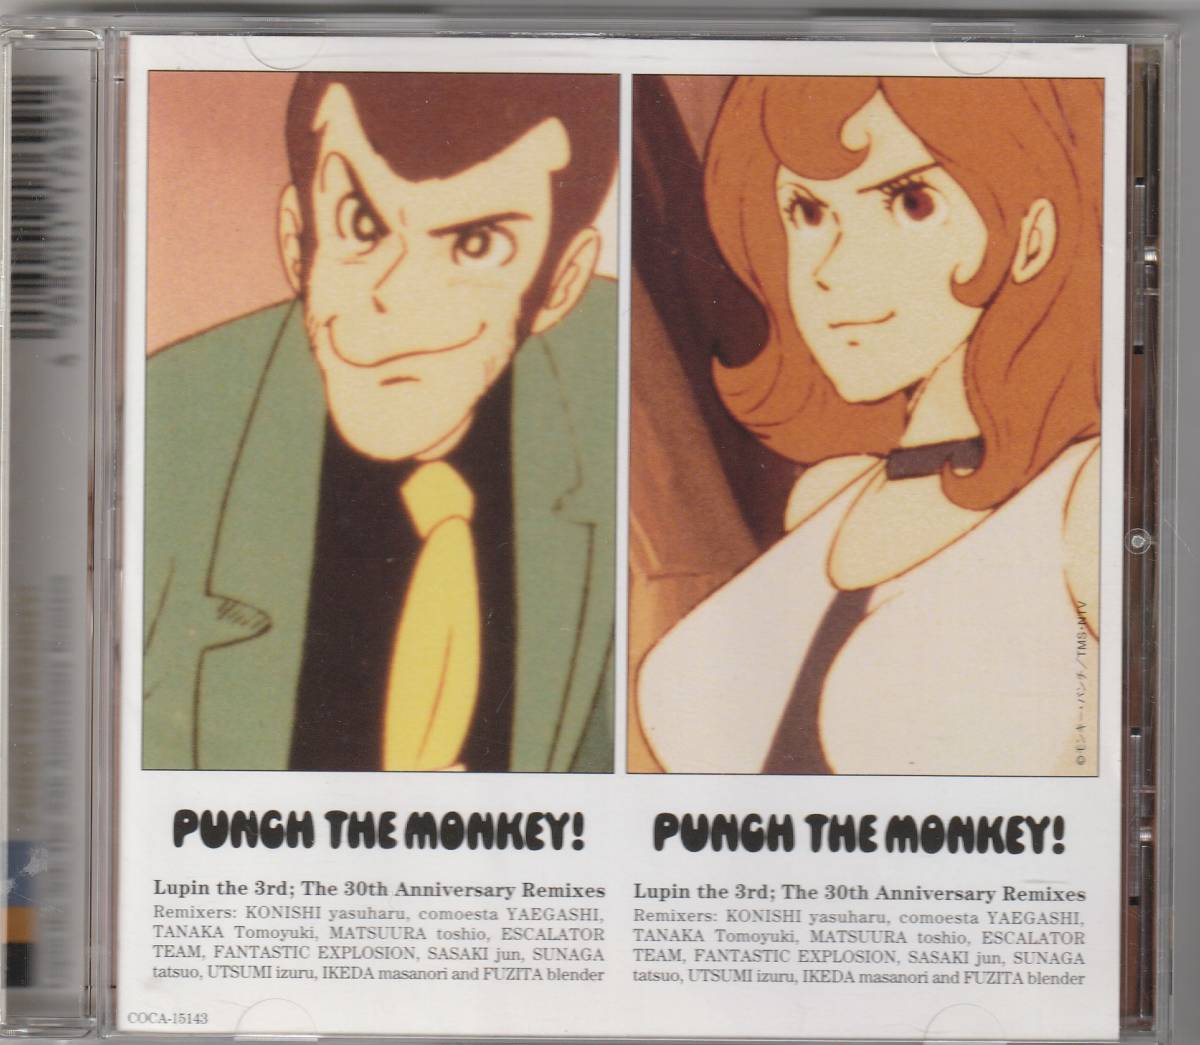 PUNCH THE MONKEY! Lupin III The 30th Anniversary Remixes 30 anniversary remix compilation 